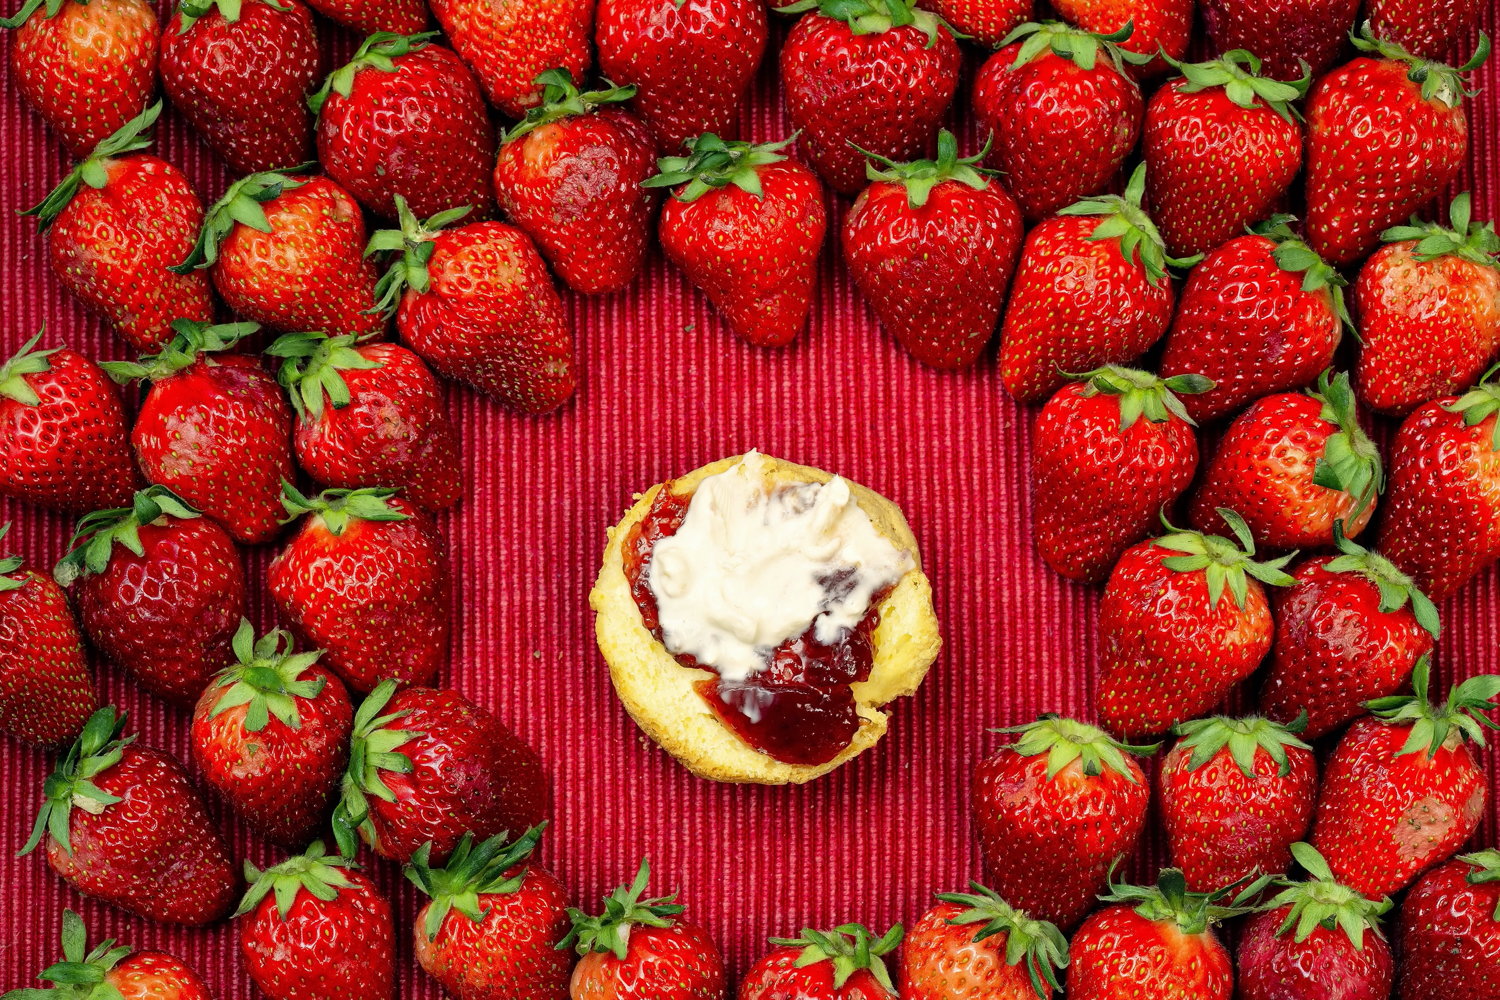 strawberries framing the food in the center